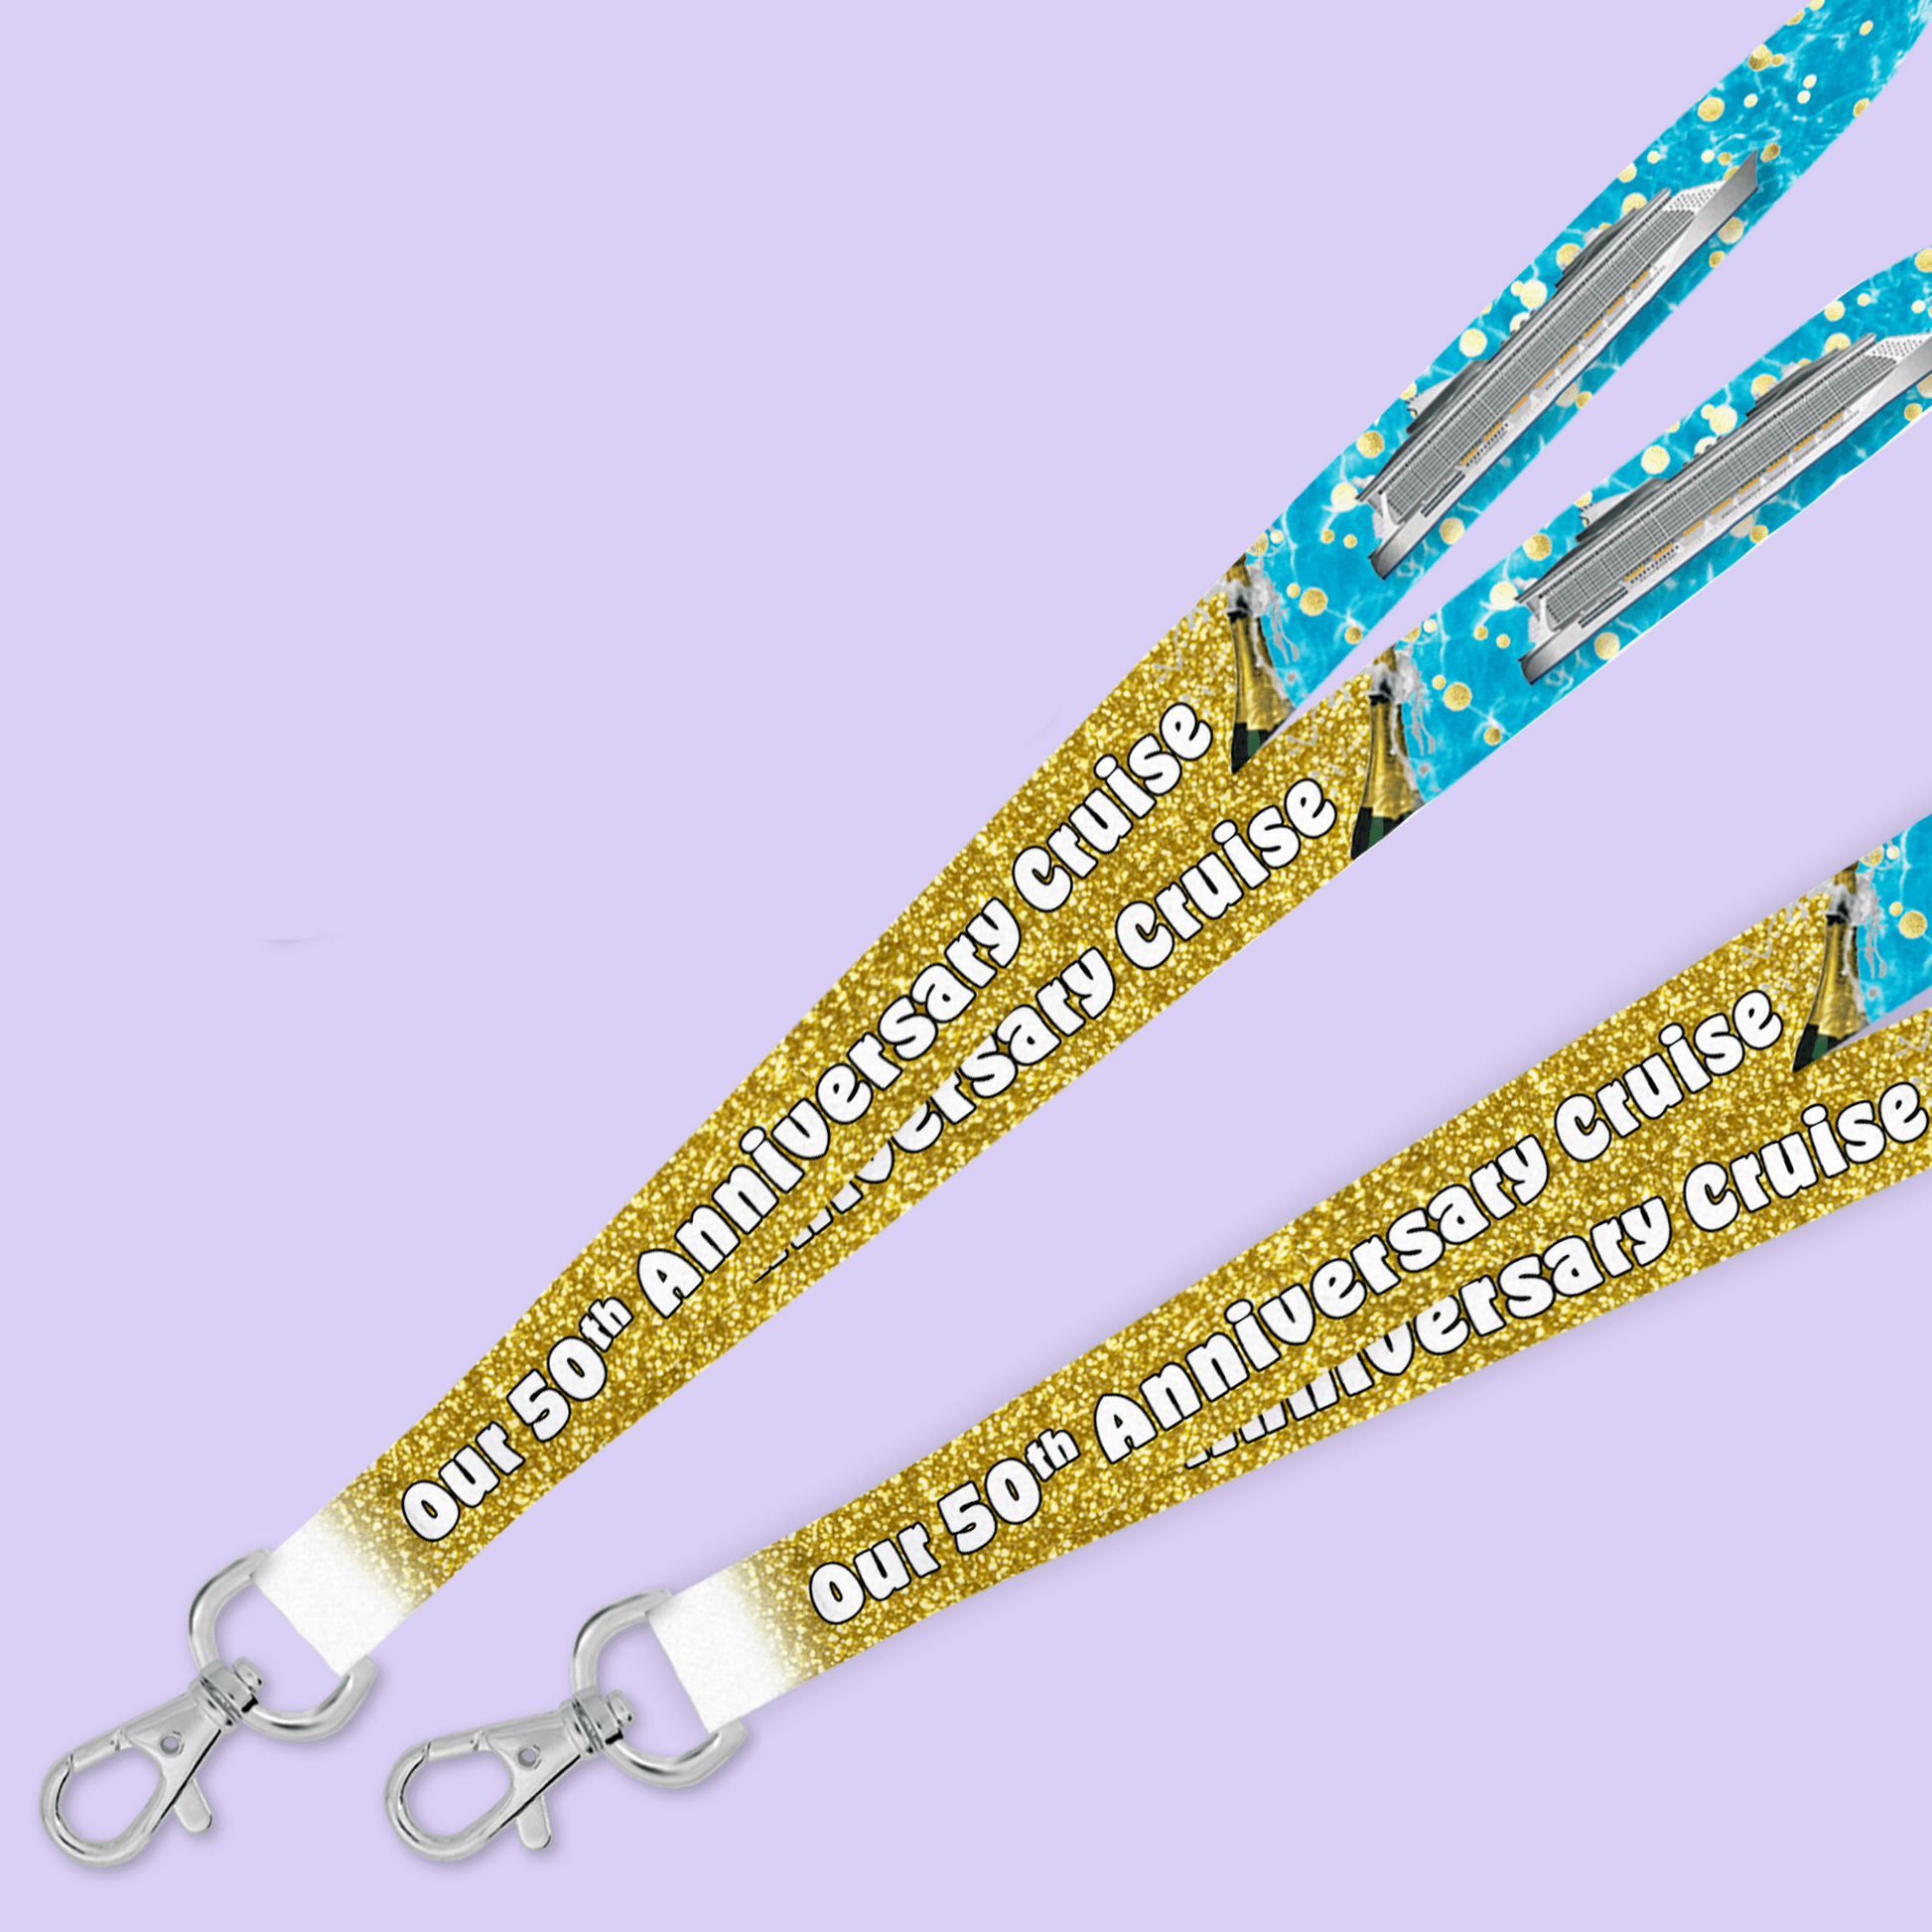 Personalized Anniversary Cruise Lanyard - Two Crafty Gays